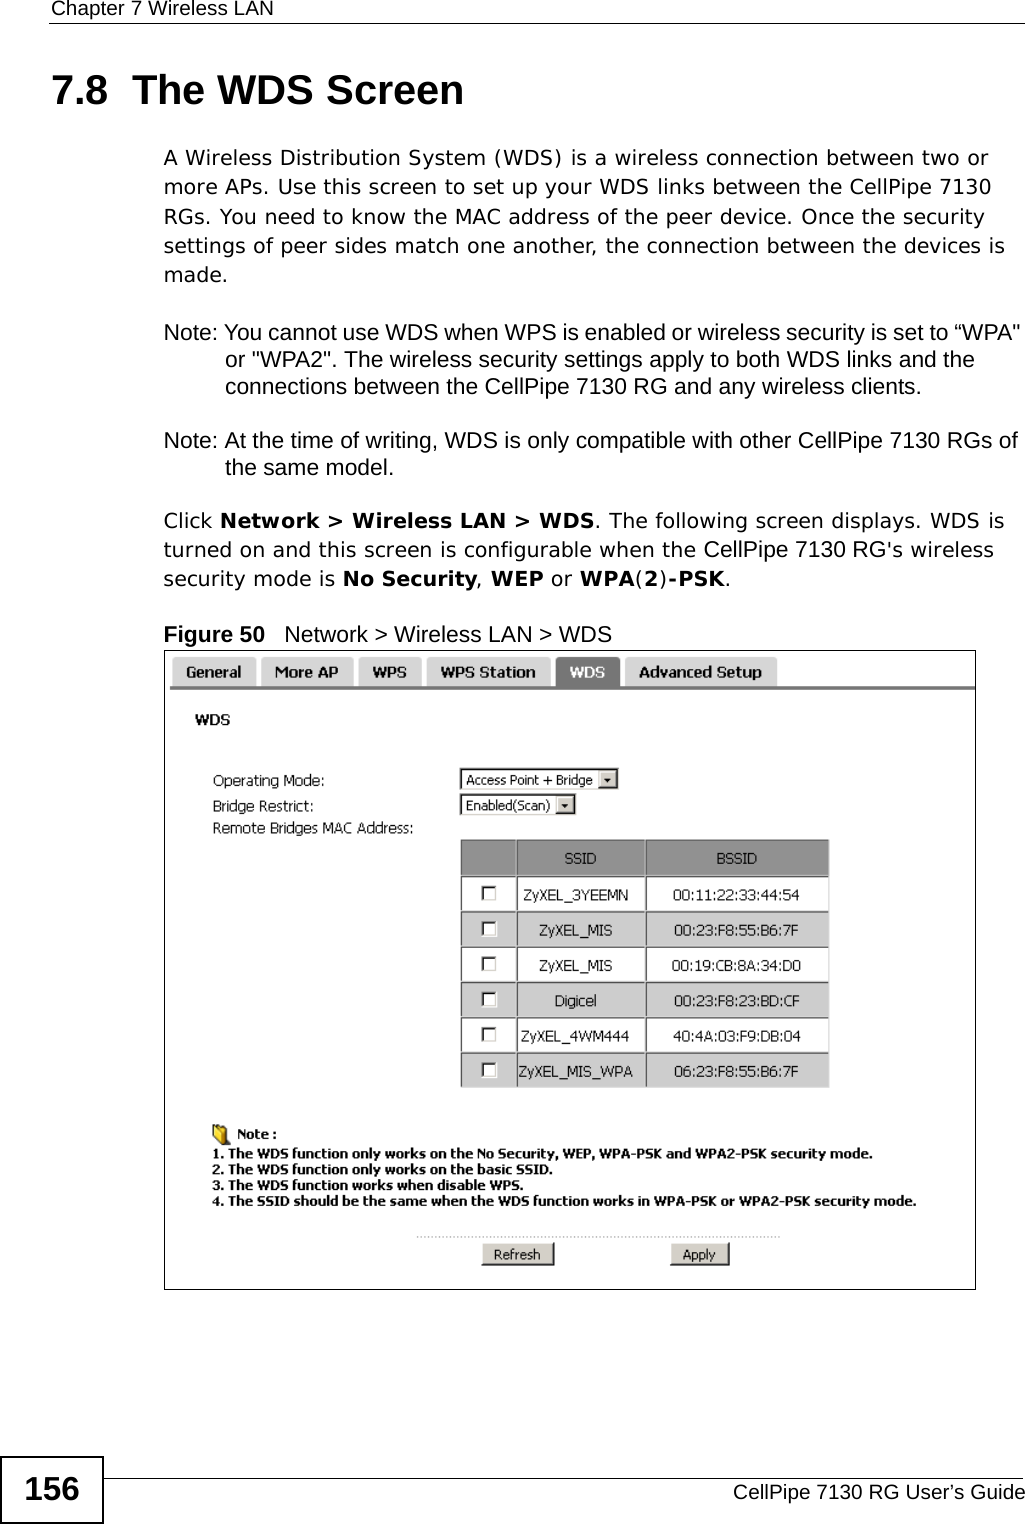 Chapter 7 Wireless LANCellPipe 7130 RG User’s Guide1567.8  The WDS Screen A Wireless Distribution System (WDS) is a wireless connection between two or more APs. Use this screen to set up your WDS links between the CellPipe 7130 RGs. You need to know the MAC address of the peer device. Once the security settings of peer sides match one another, the connection between the devices is made. Note: You cannot use WDS when WPS is enabled or wireless security is set to “WPA&quot; or &quot;WPA2&quot;. The wireless security settings apply to both WDS links and the connections between the CellPipe 7130 RG and any wireless clients.Note: At the time of writing, WDS is only compatible with other CellPipe 7130 RGs of the same model. Click Network &gt; Wireless LAN &gt; WDS. The following screen displays. WDS is turned on and this screen is configurable when the CellPipe 7130 RG&apos;s wireless security mode is No Security, WEP or WPA(2)-PSK.Figure 50   Network &gt; Wireless LAN &gt; WDS